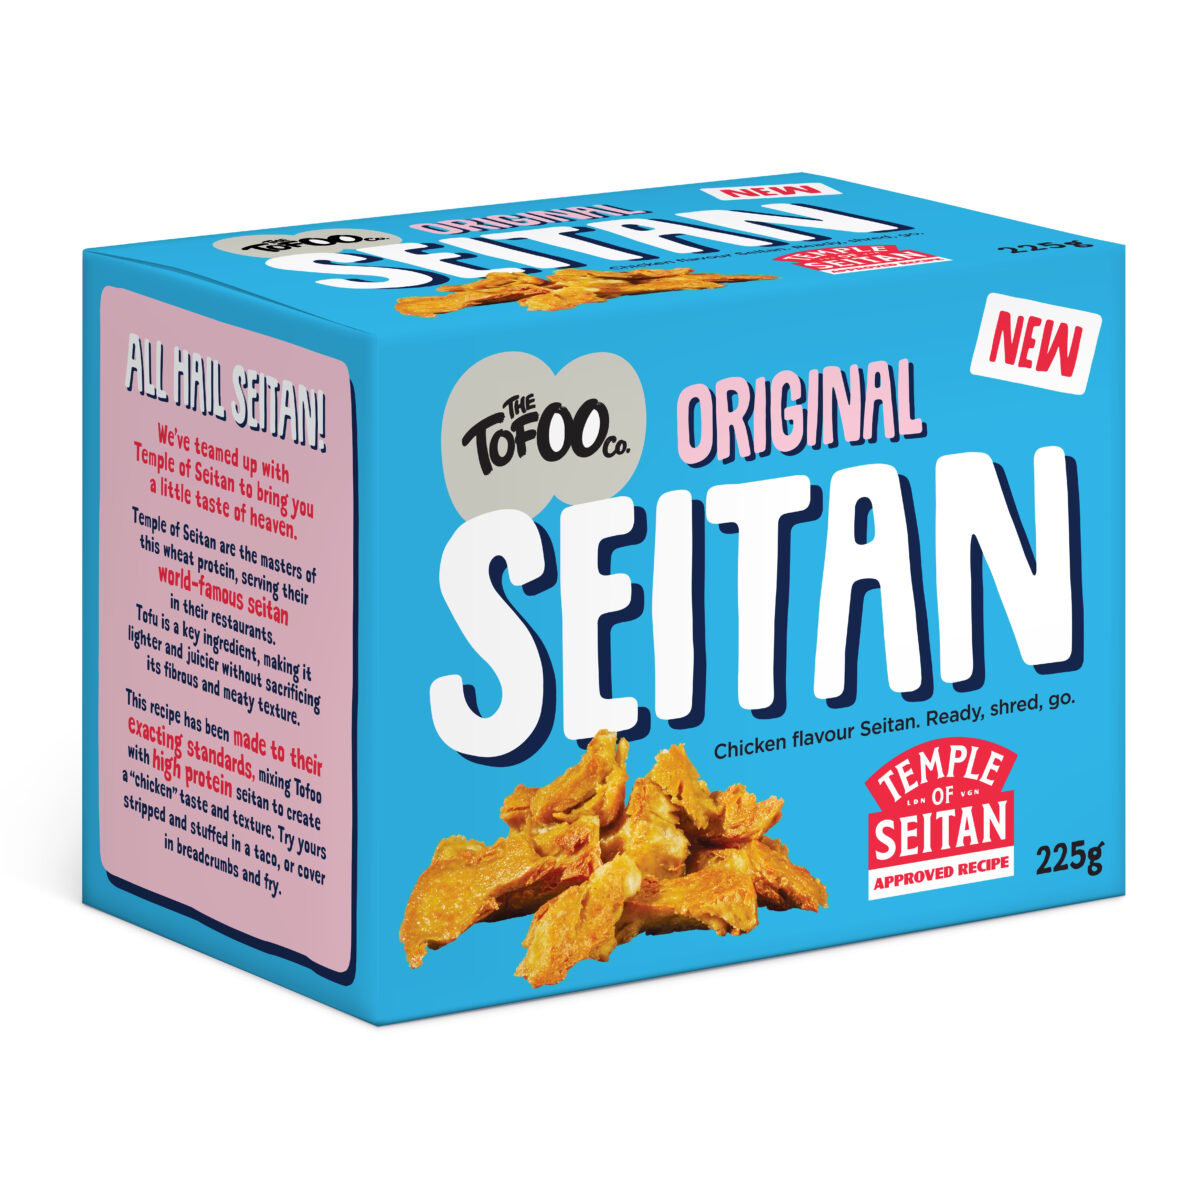 A chicken-flavored seitan product from Tofoo